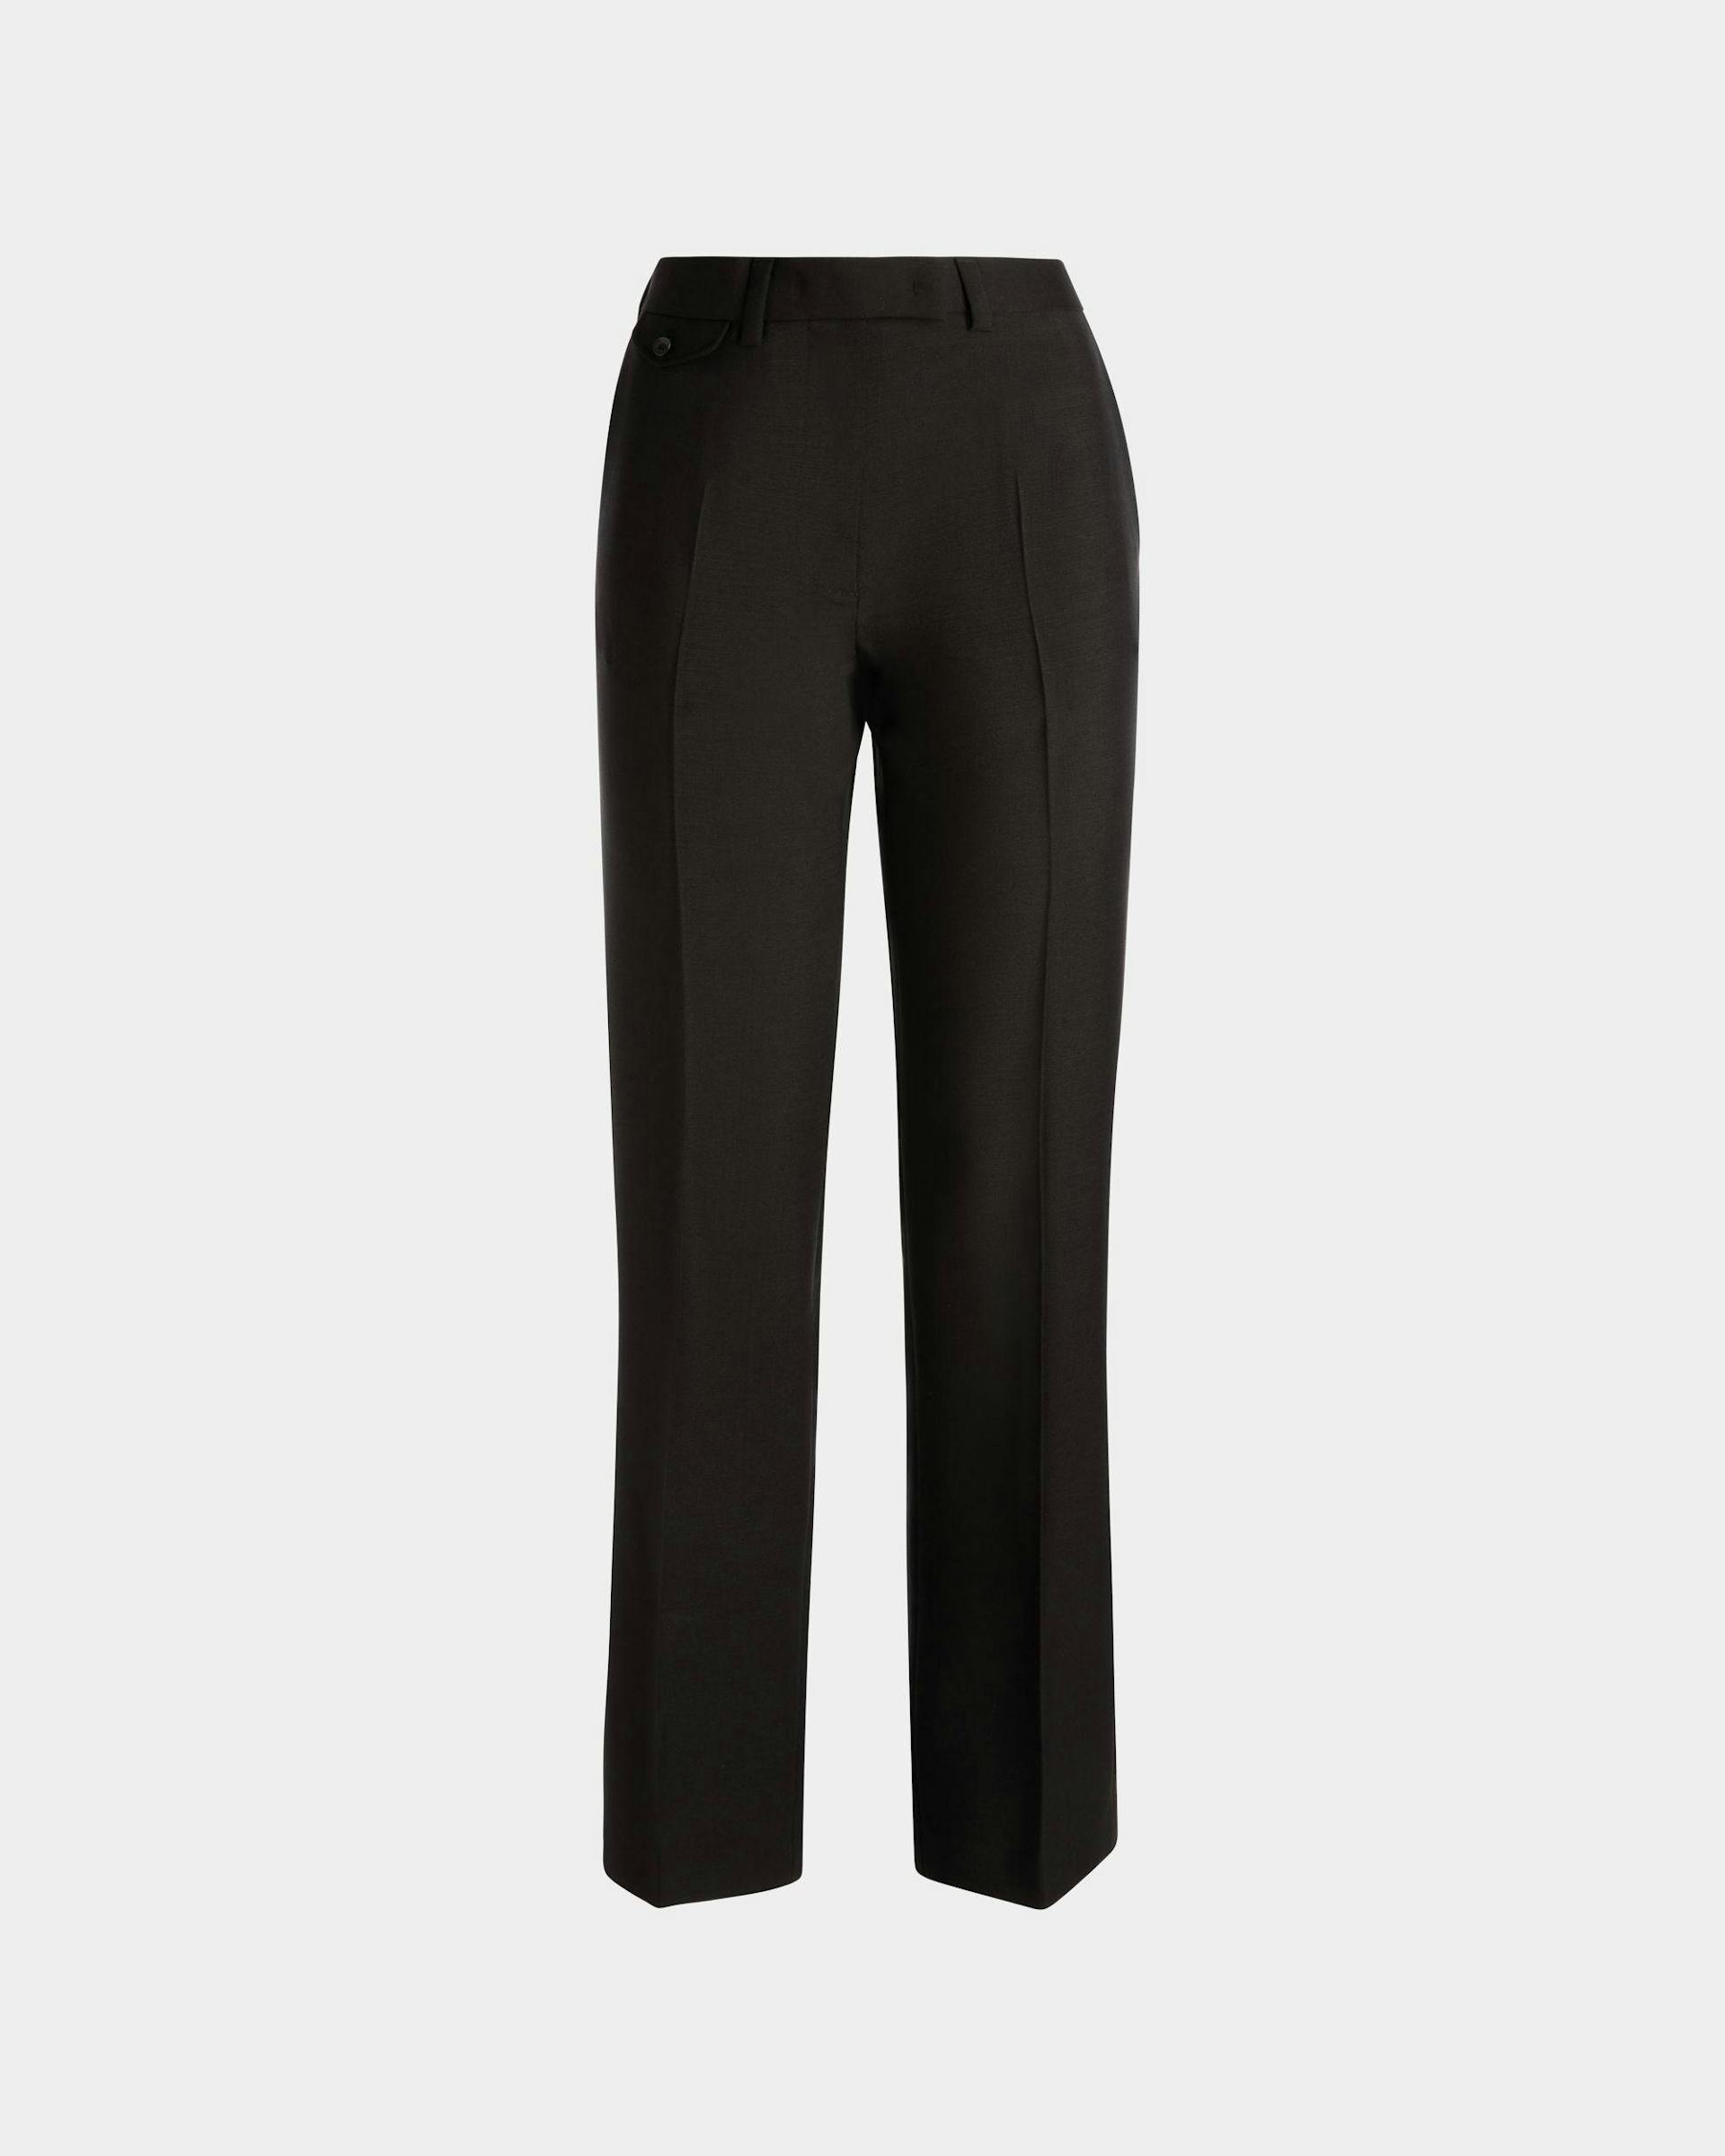 Women's Tailored Straight Leg Pants In Black Mohair Wool Mix | Bally | Still Life Front